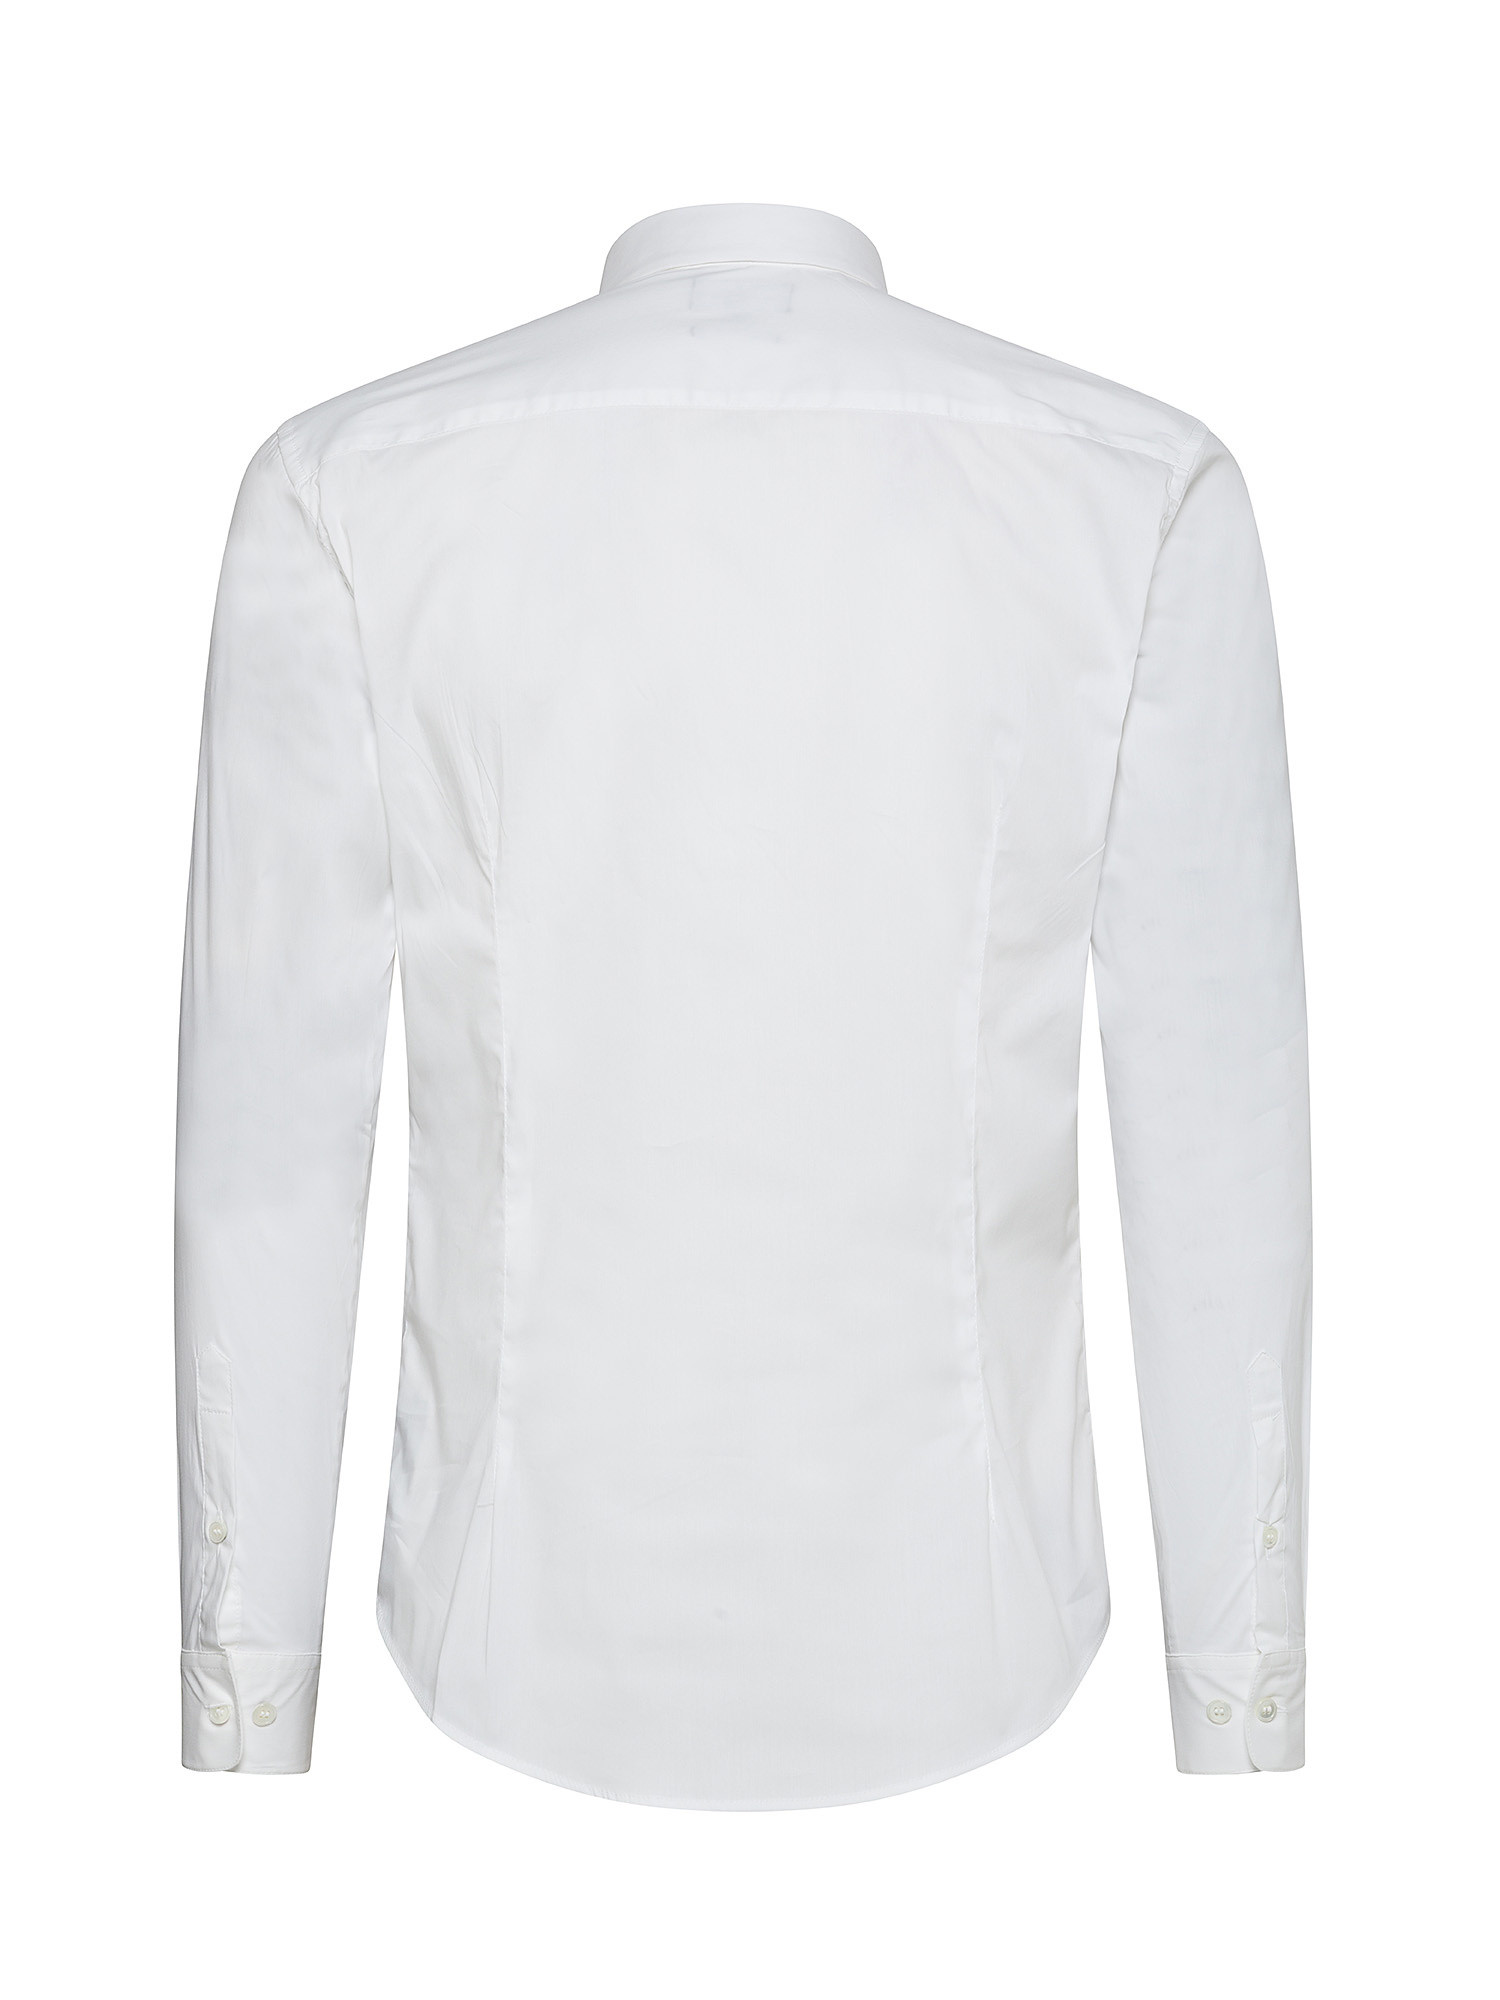 Emporio Armani - Shirt with embroidered logo, White, large image number 2